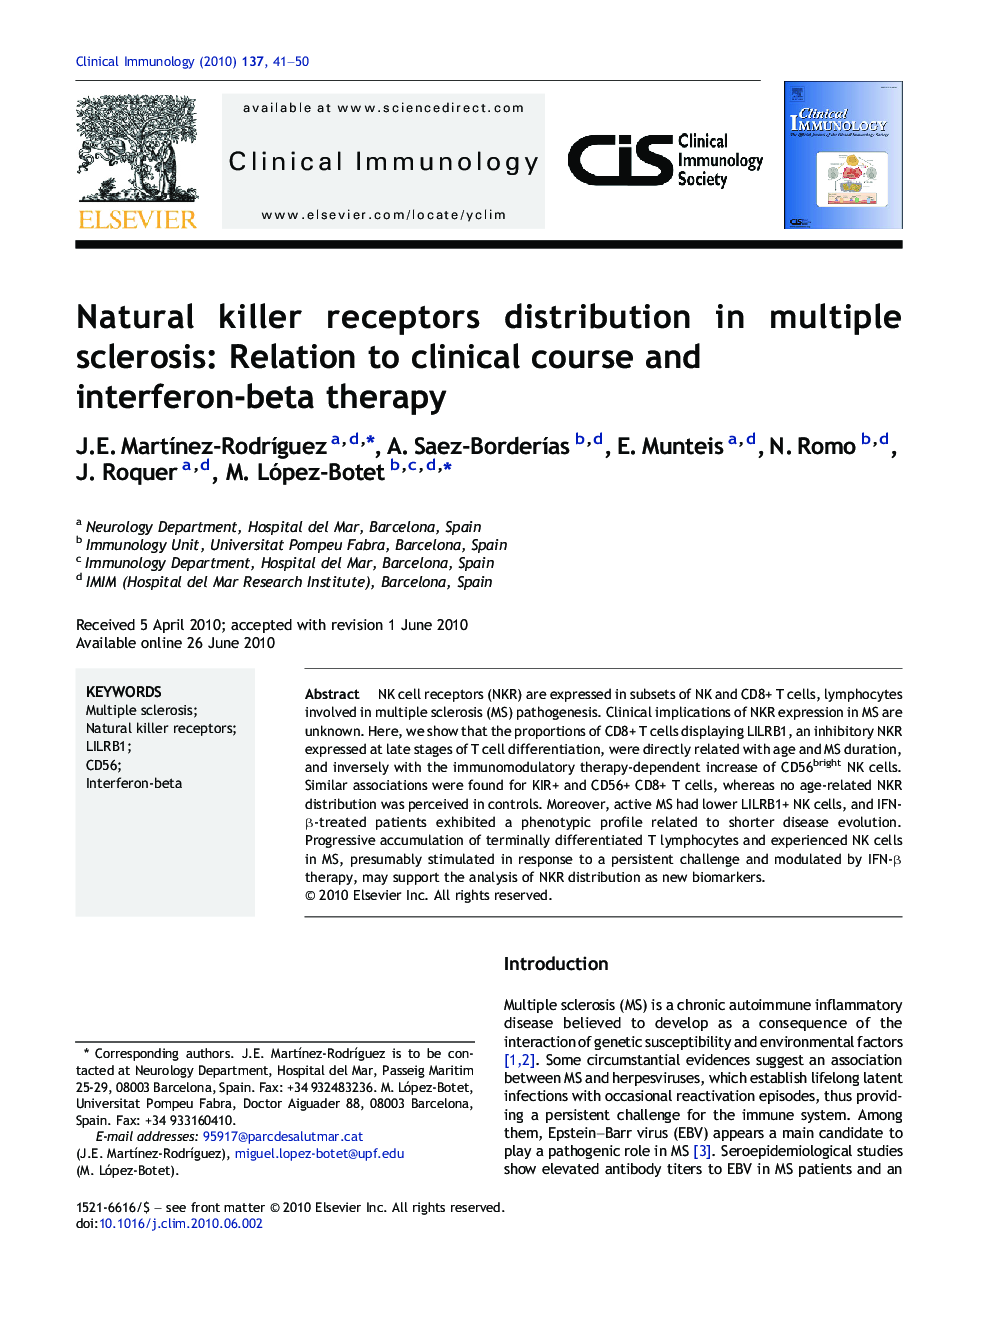 Natural killer receptors distribution in multiple sclerosis: Relation to clinical course and interferon-beta therapy